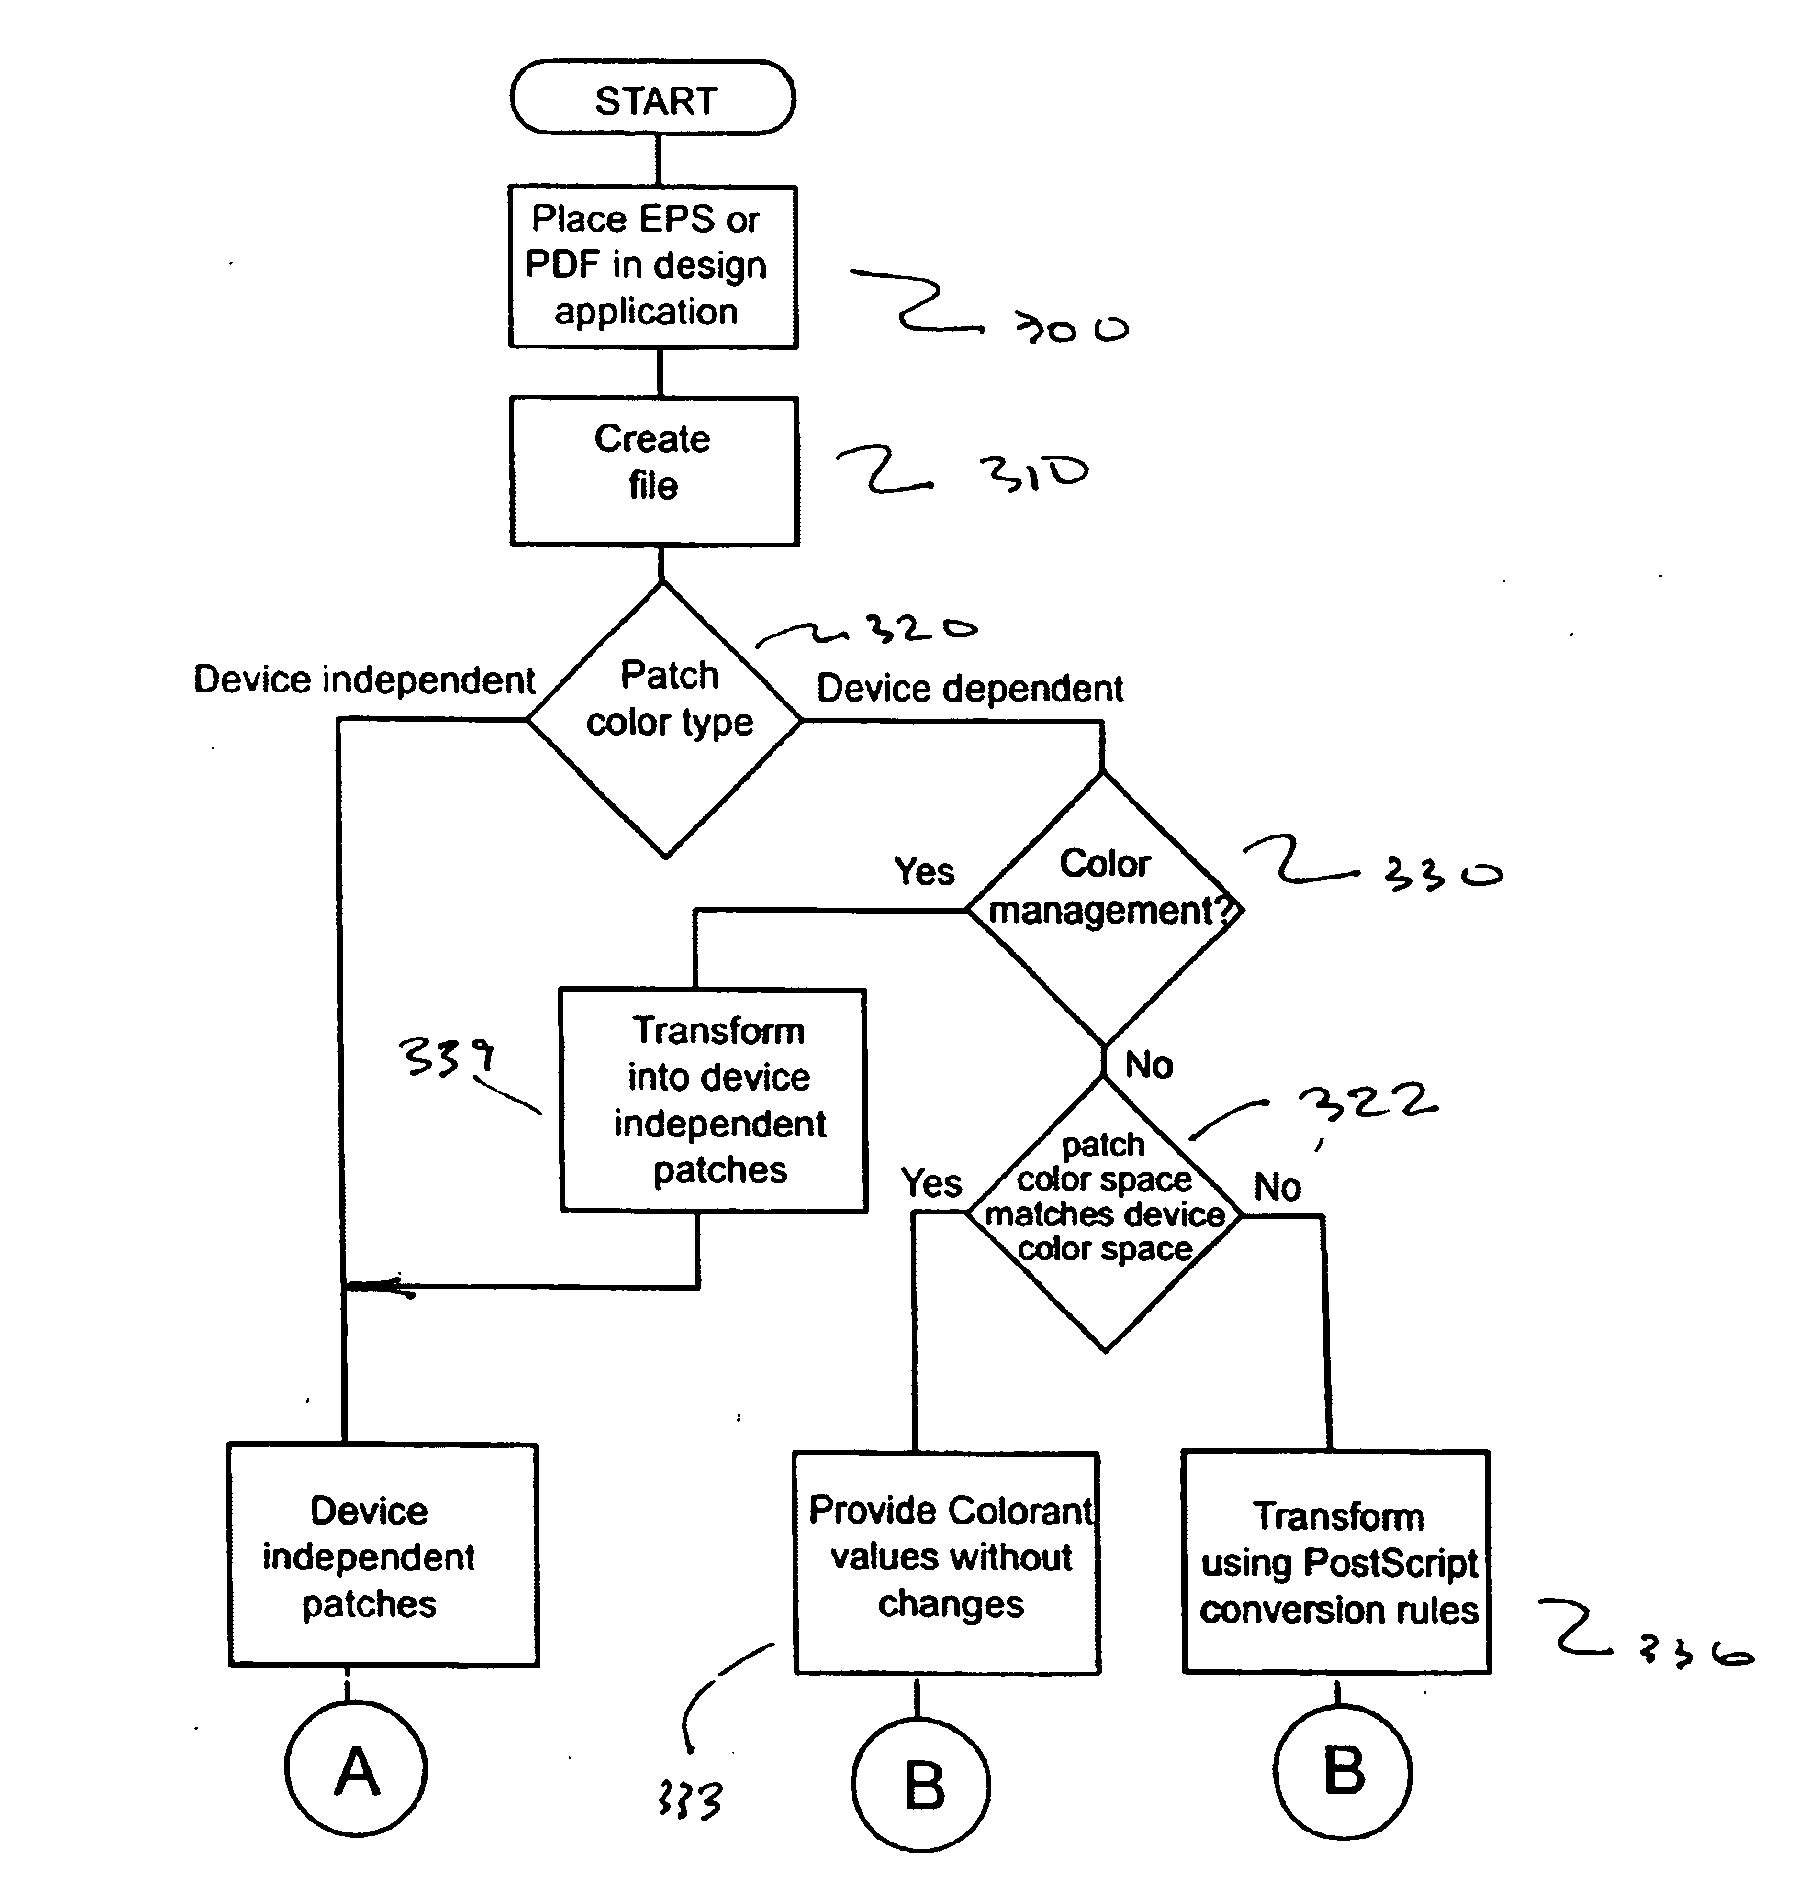 Method for confirming correct selection of an input profile for a color printer